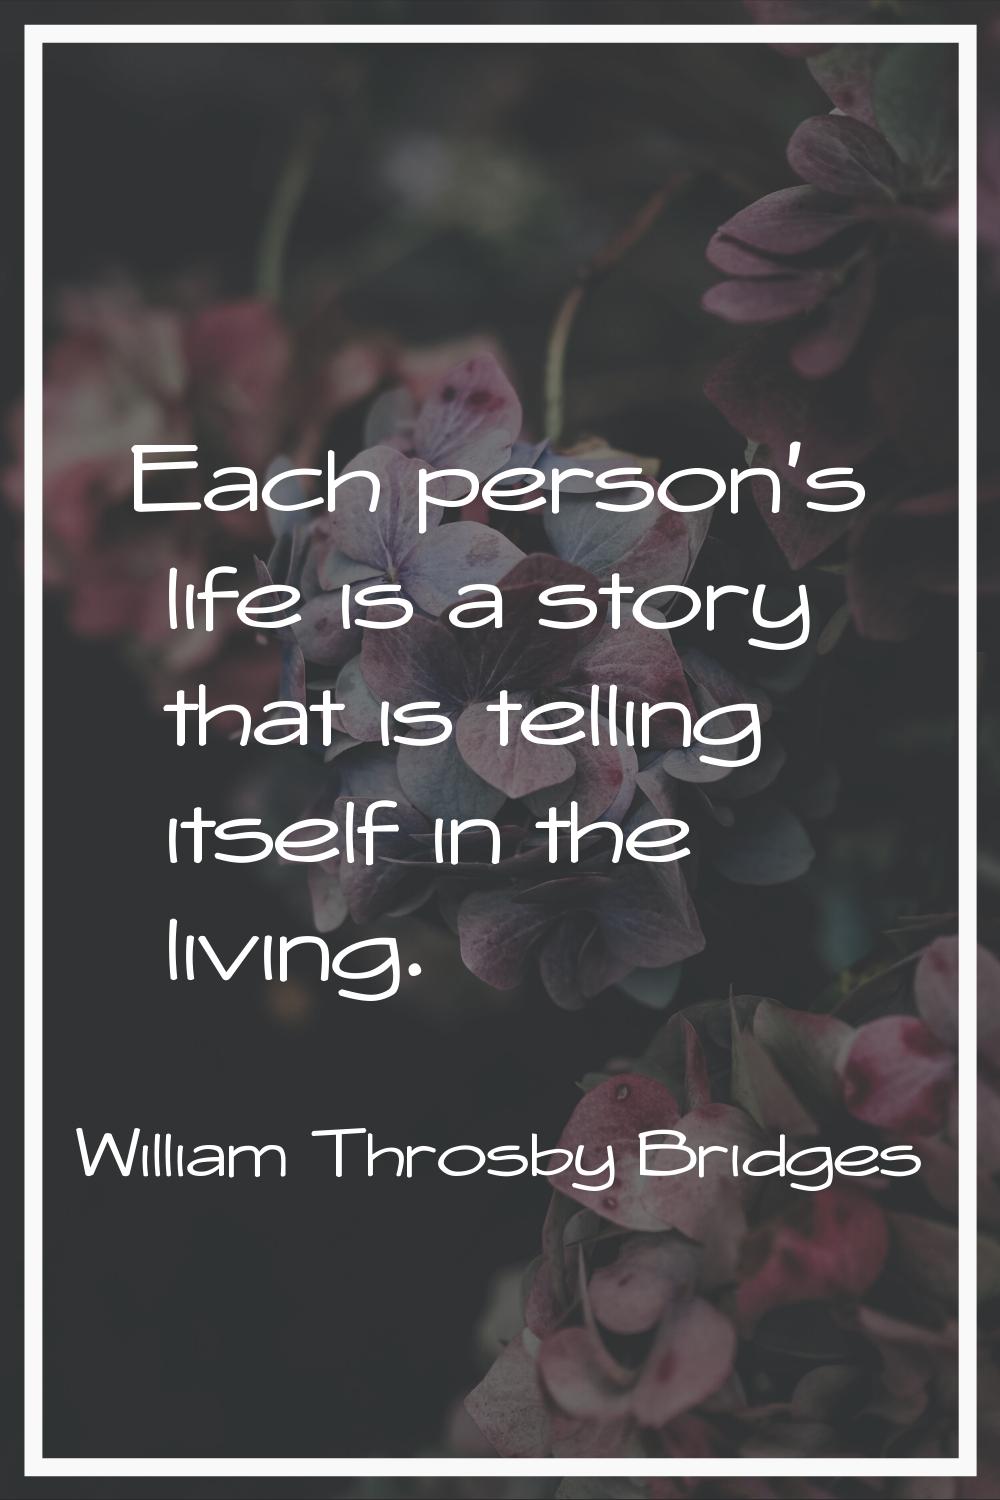 Each person's life is a story that is telling itself in the living.